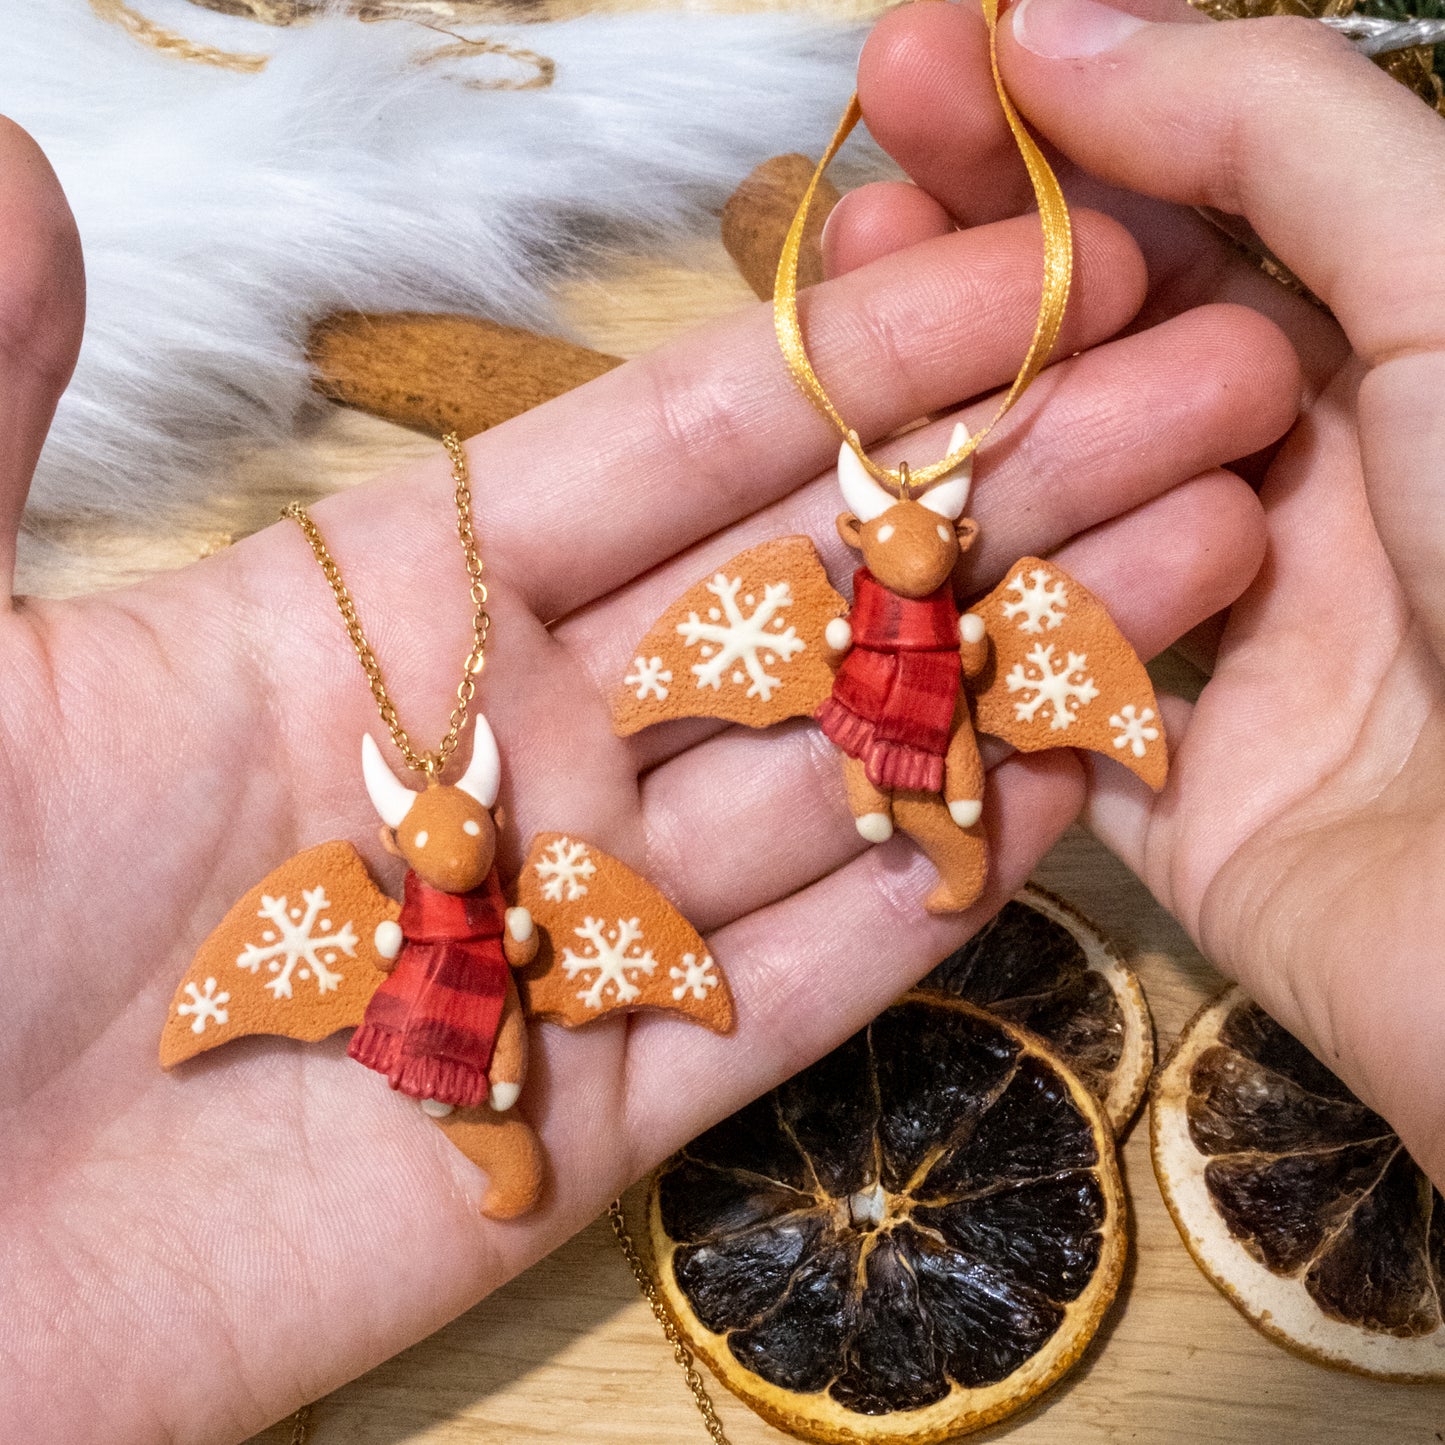 Gingerbread Dragon Necklace/Ornament in Polymer Clay